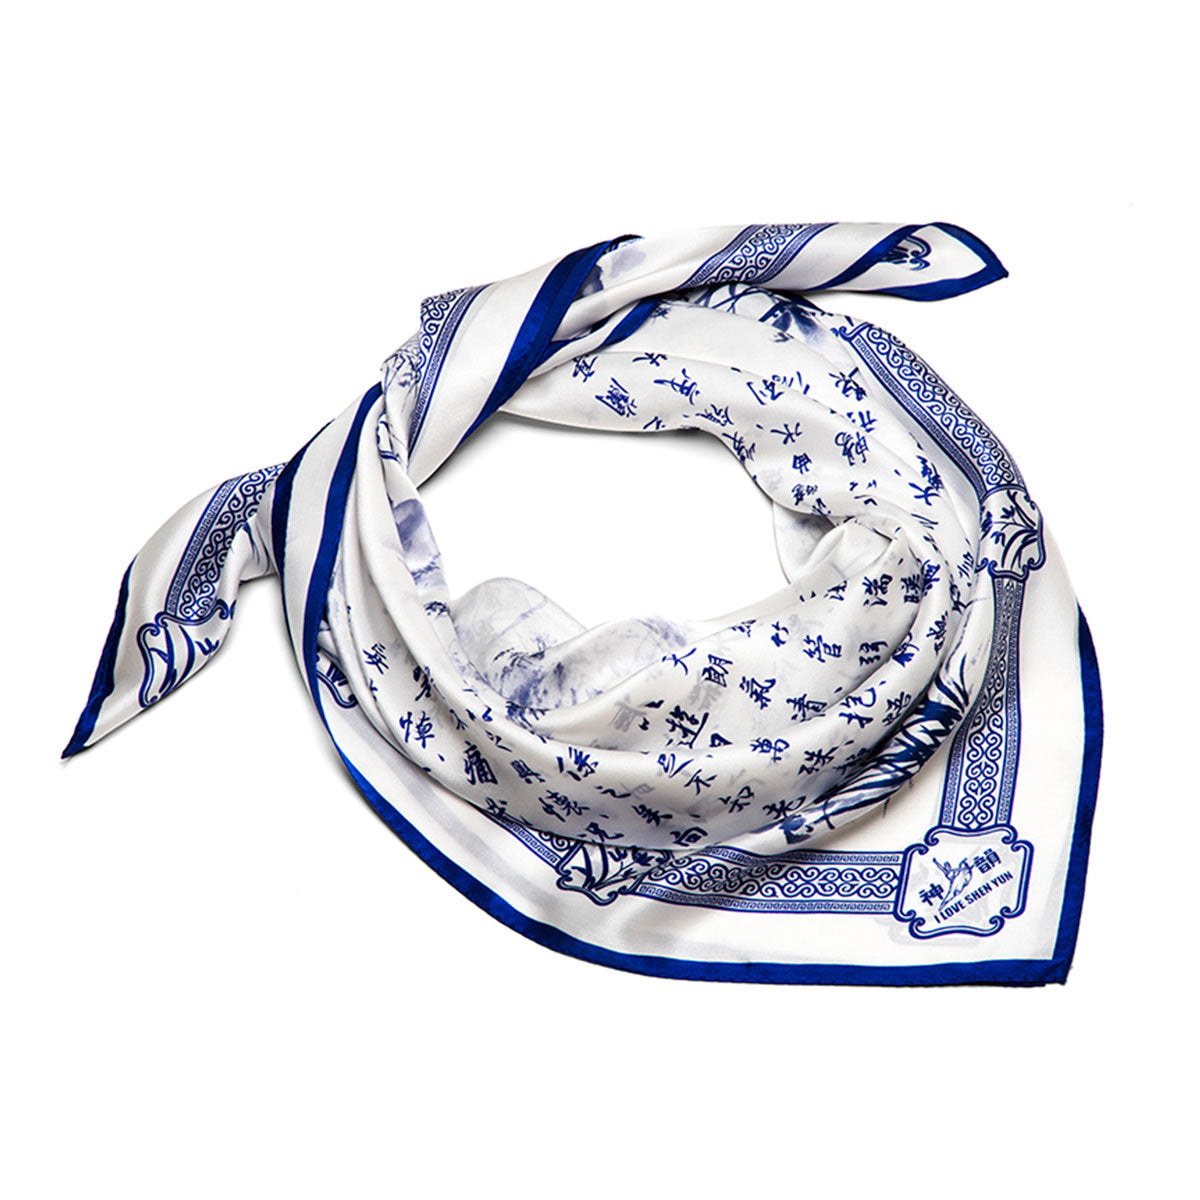 Poets of the Orchid Pavilion Silk Scarf | Shen Yun Shop